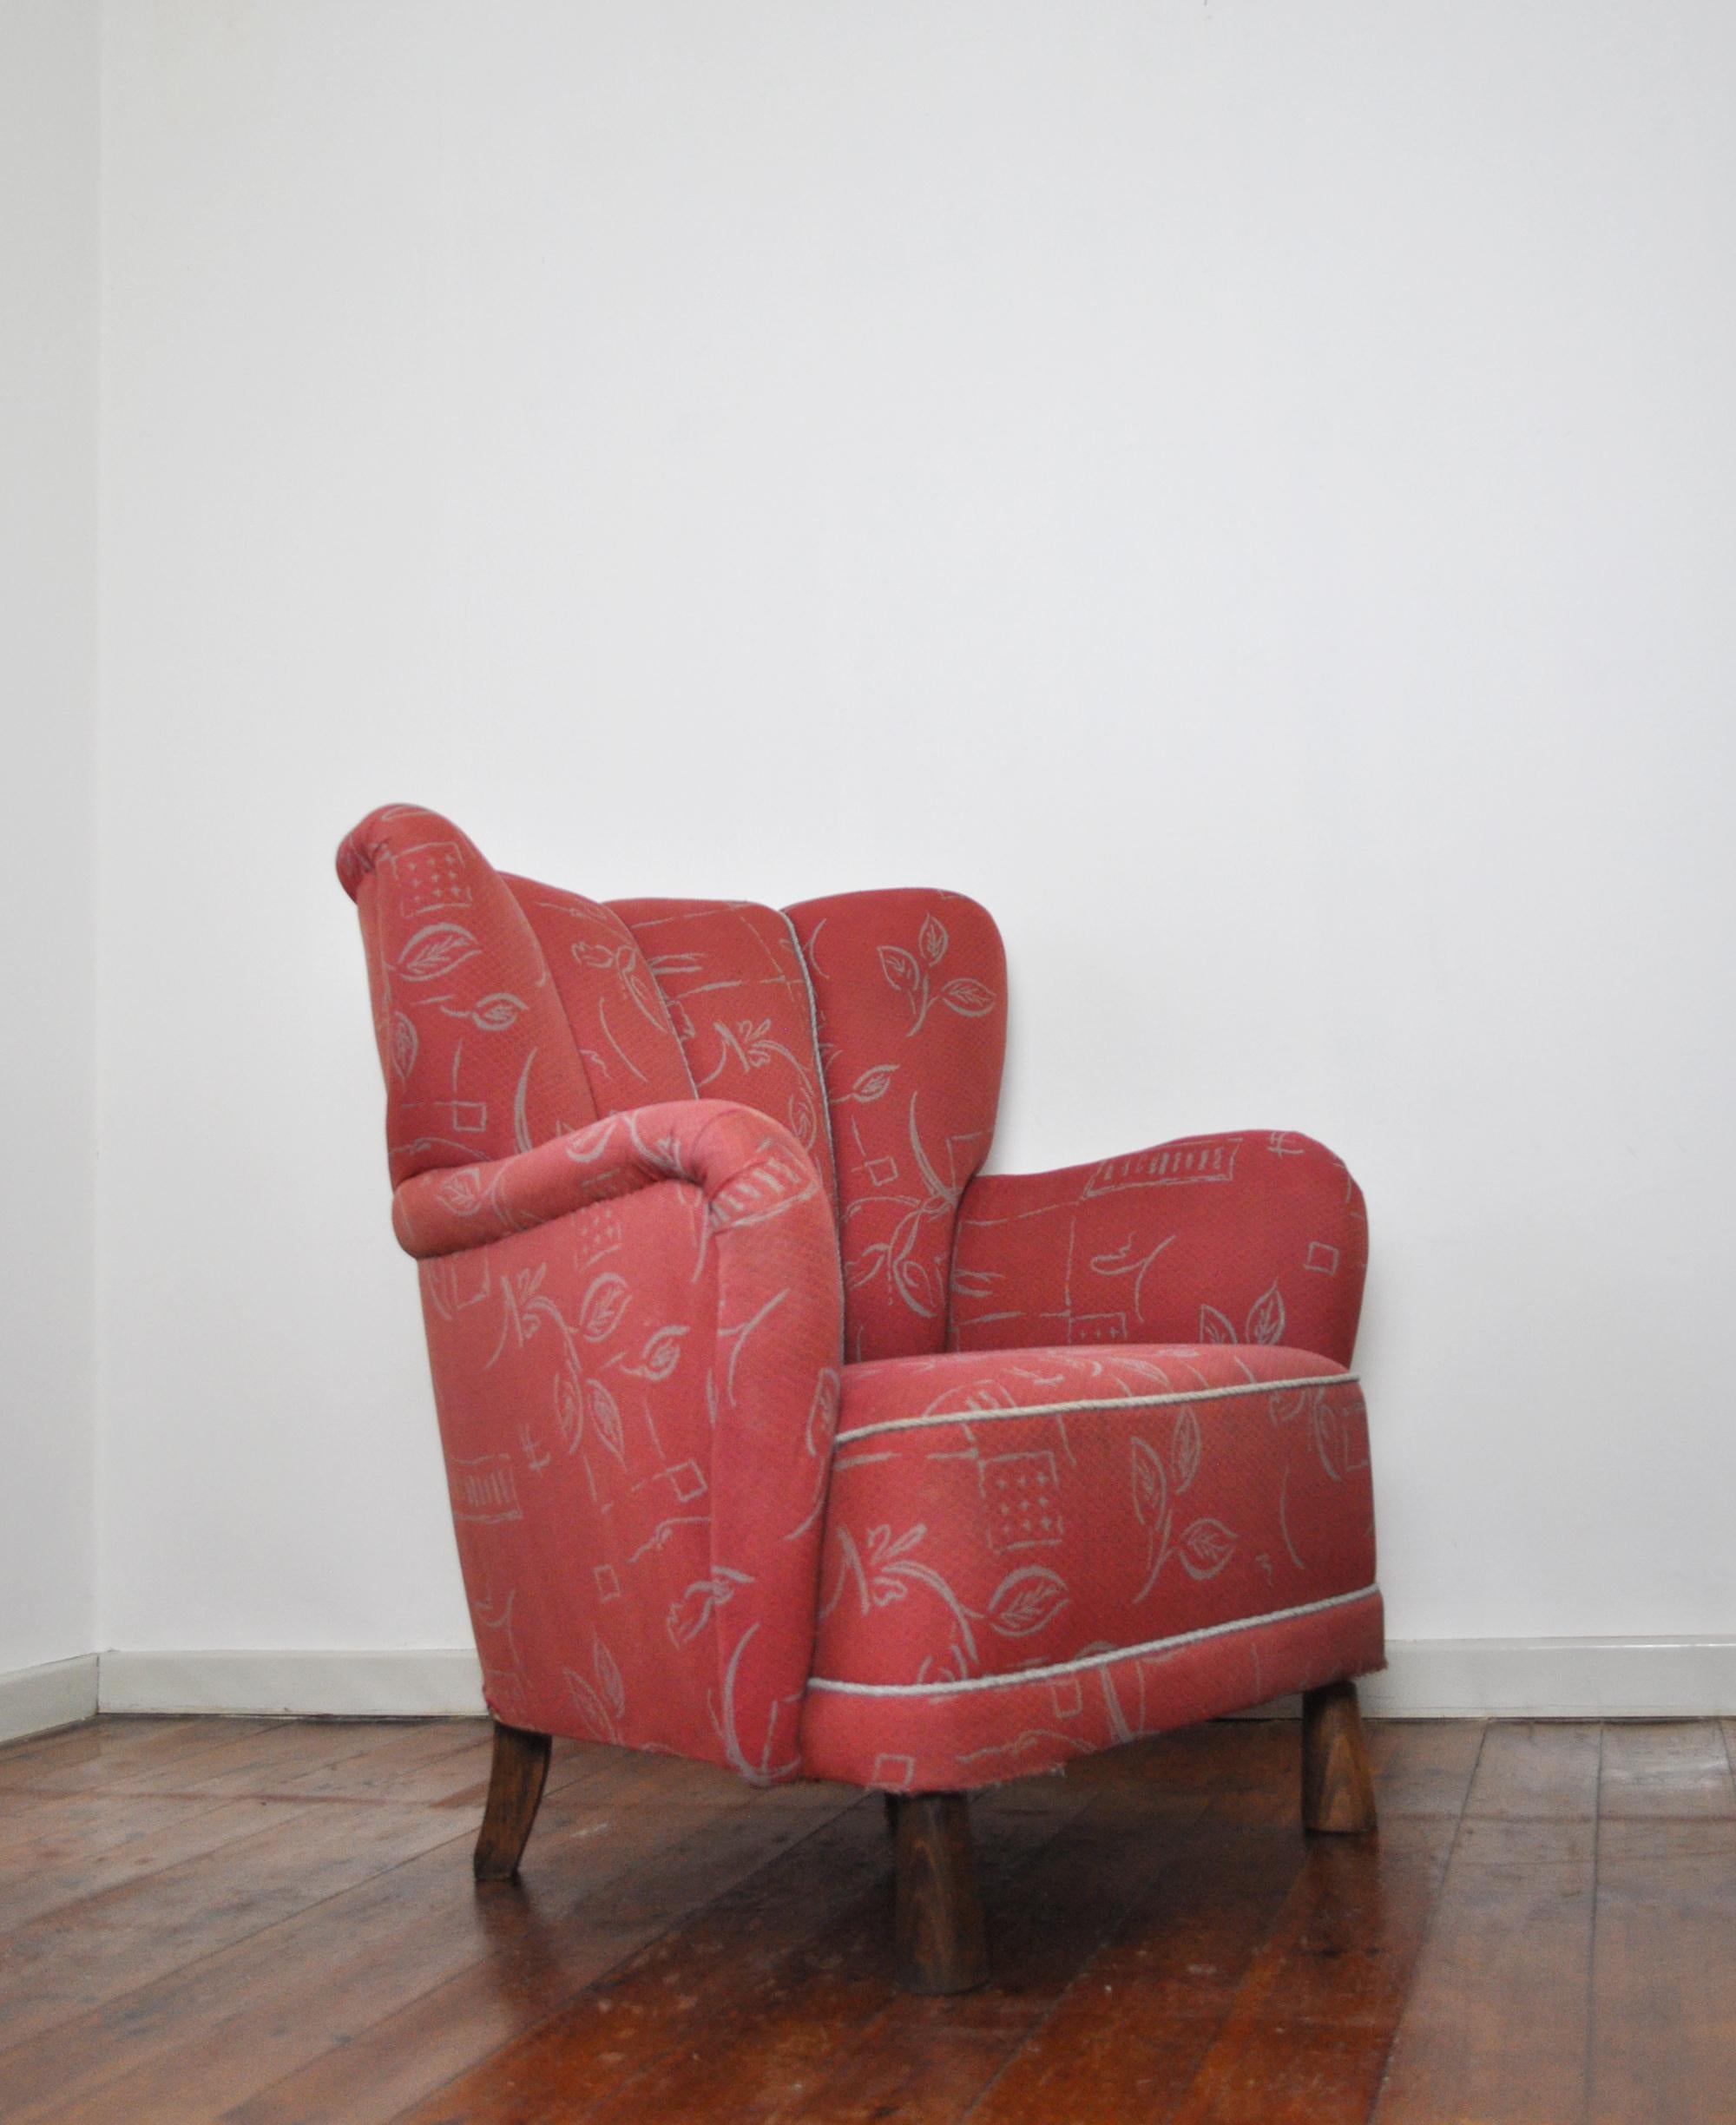 Stained Danish Midcentury High Back Lounge or Club Chair, 1940s